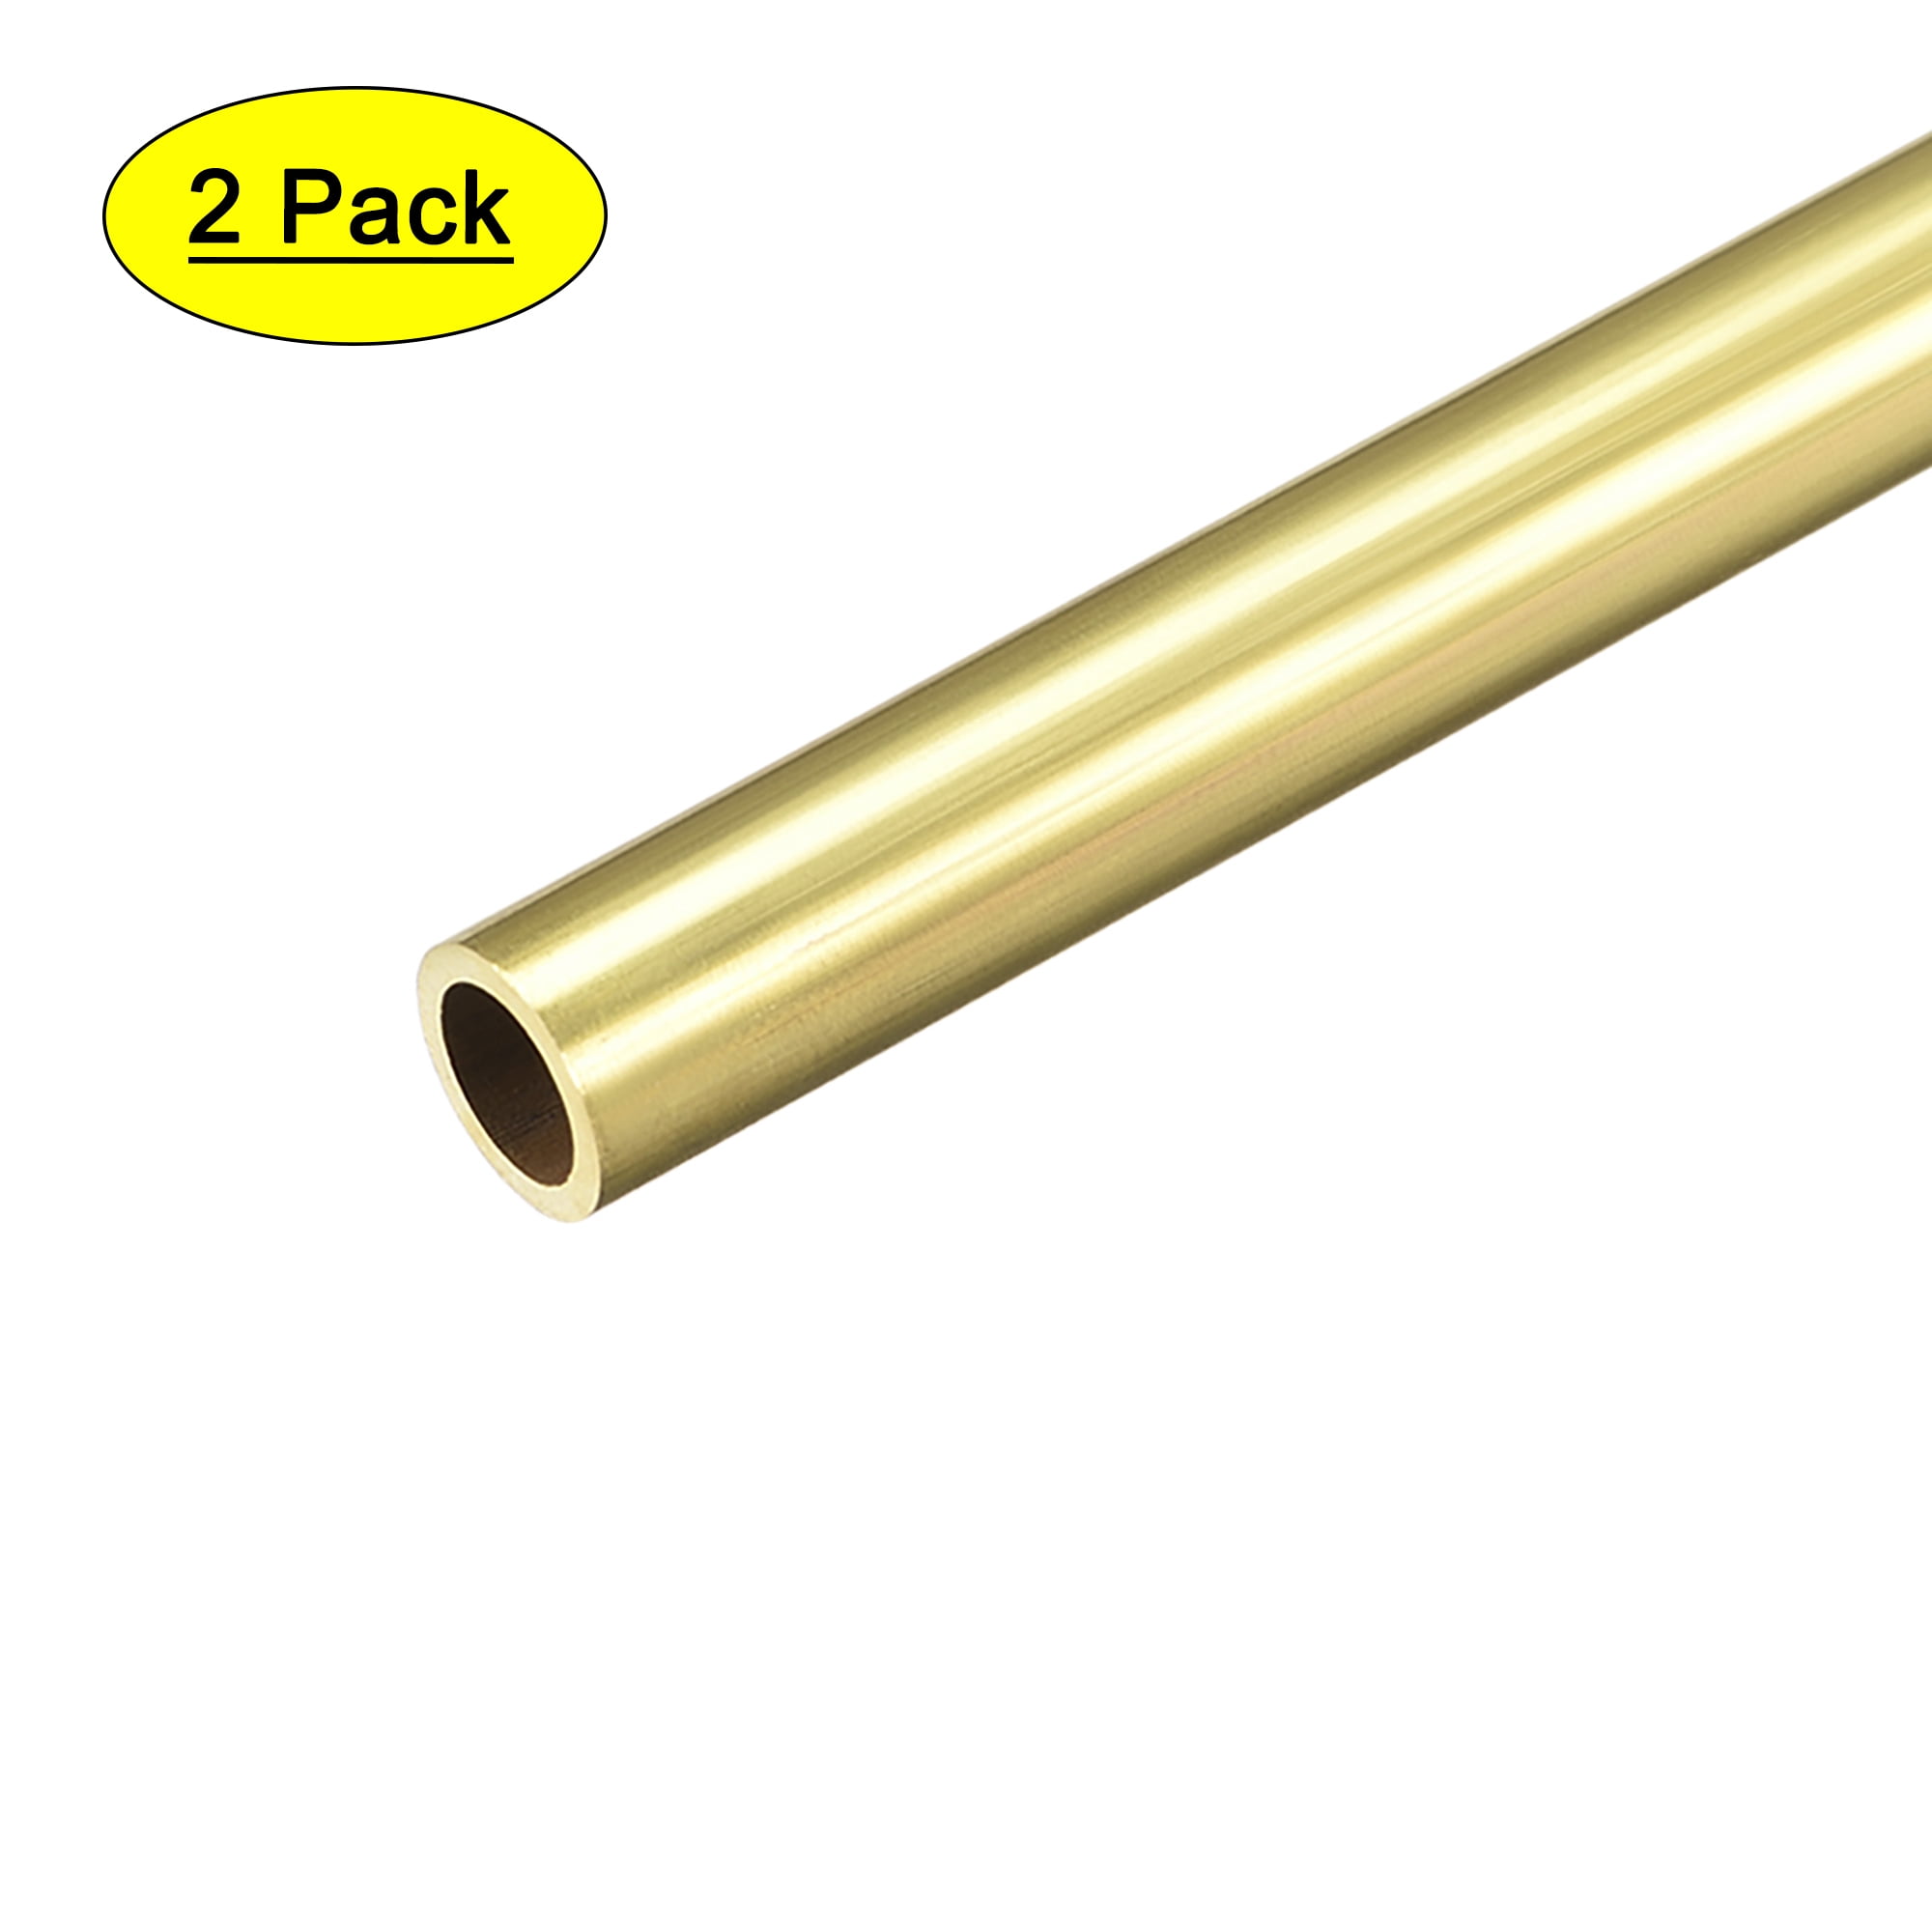 uxcell Brass Round Tube 300mm Length 4mm OD 1mm Wall Thickness Seamless Straight Pipe Tubing 2 Pcs